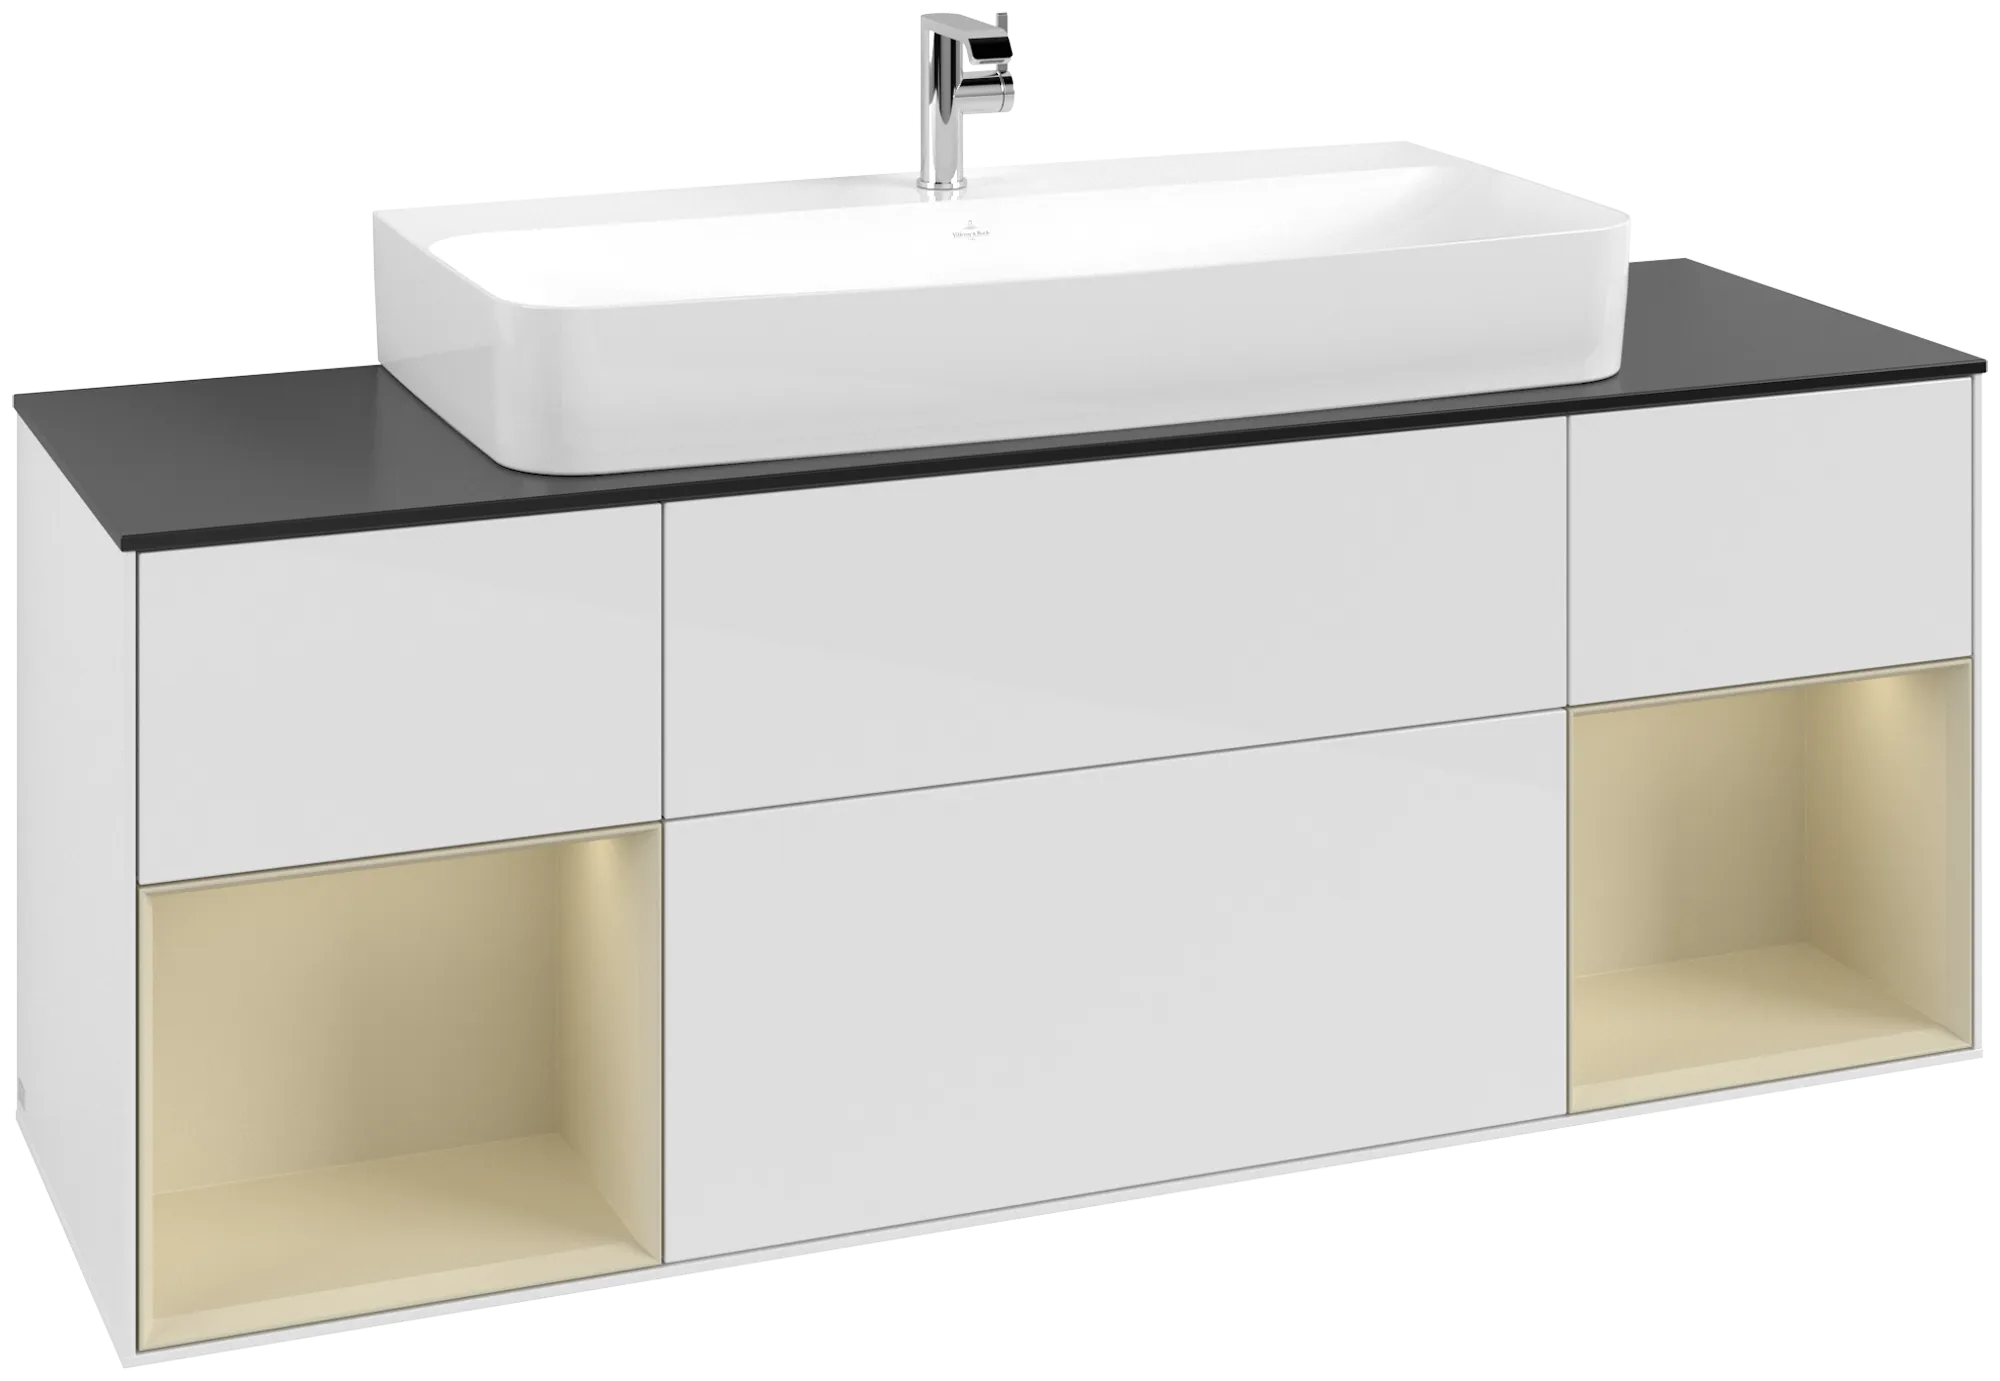 Picture of VILLEROY BOCH Finion Vanity unit, with lighting, 4 pull-out compartments, 1600 x 603 x 501 mm, Glossy White Lacquer / Silk Grey Matt Lacquer / Glass Black Matt #G212HJGF